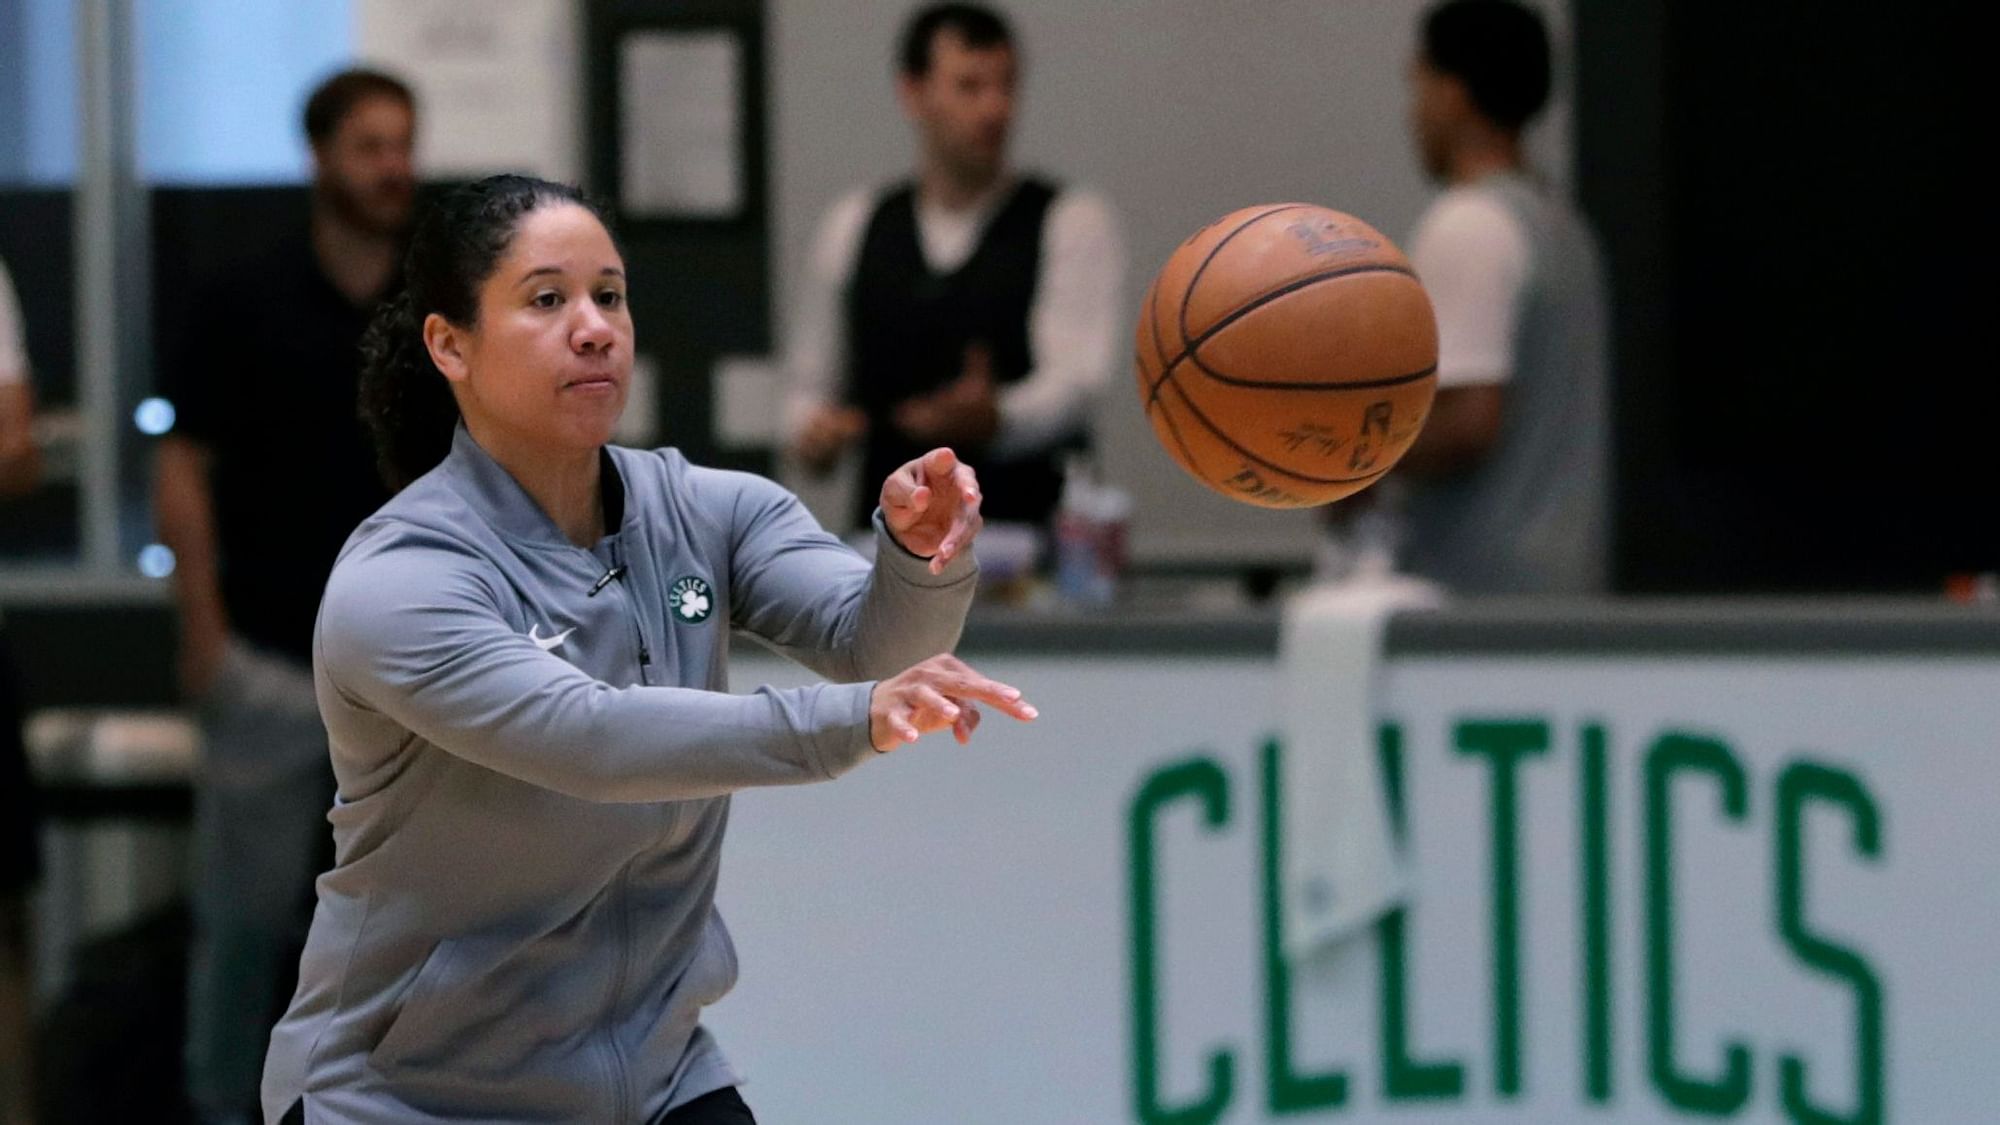 Boston Celtics assistant coach Kara Lawson at the team’s training facility in Boston, Monday, July 1, 2019. Lawson played in the WNBA from 2003-15 and also helped the U.S. win the gold medal at the 2008 Beijing Olympics.&nbsp;